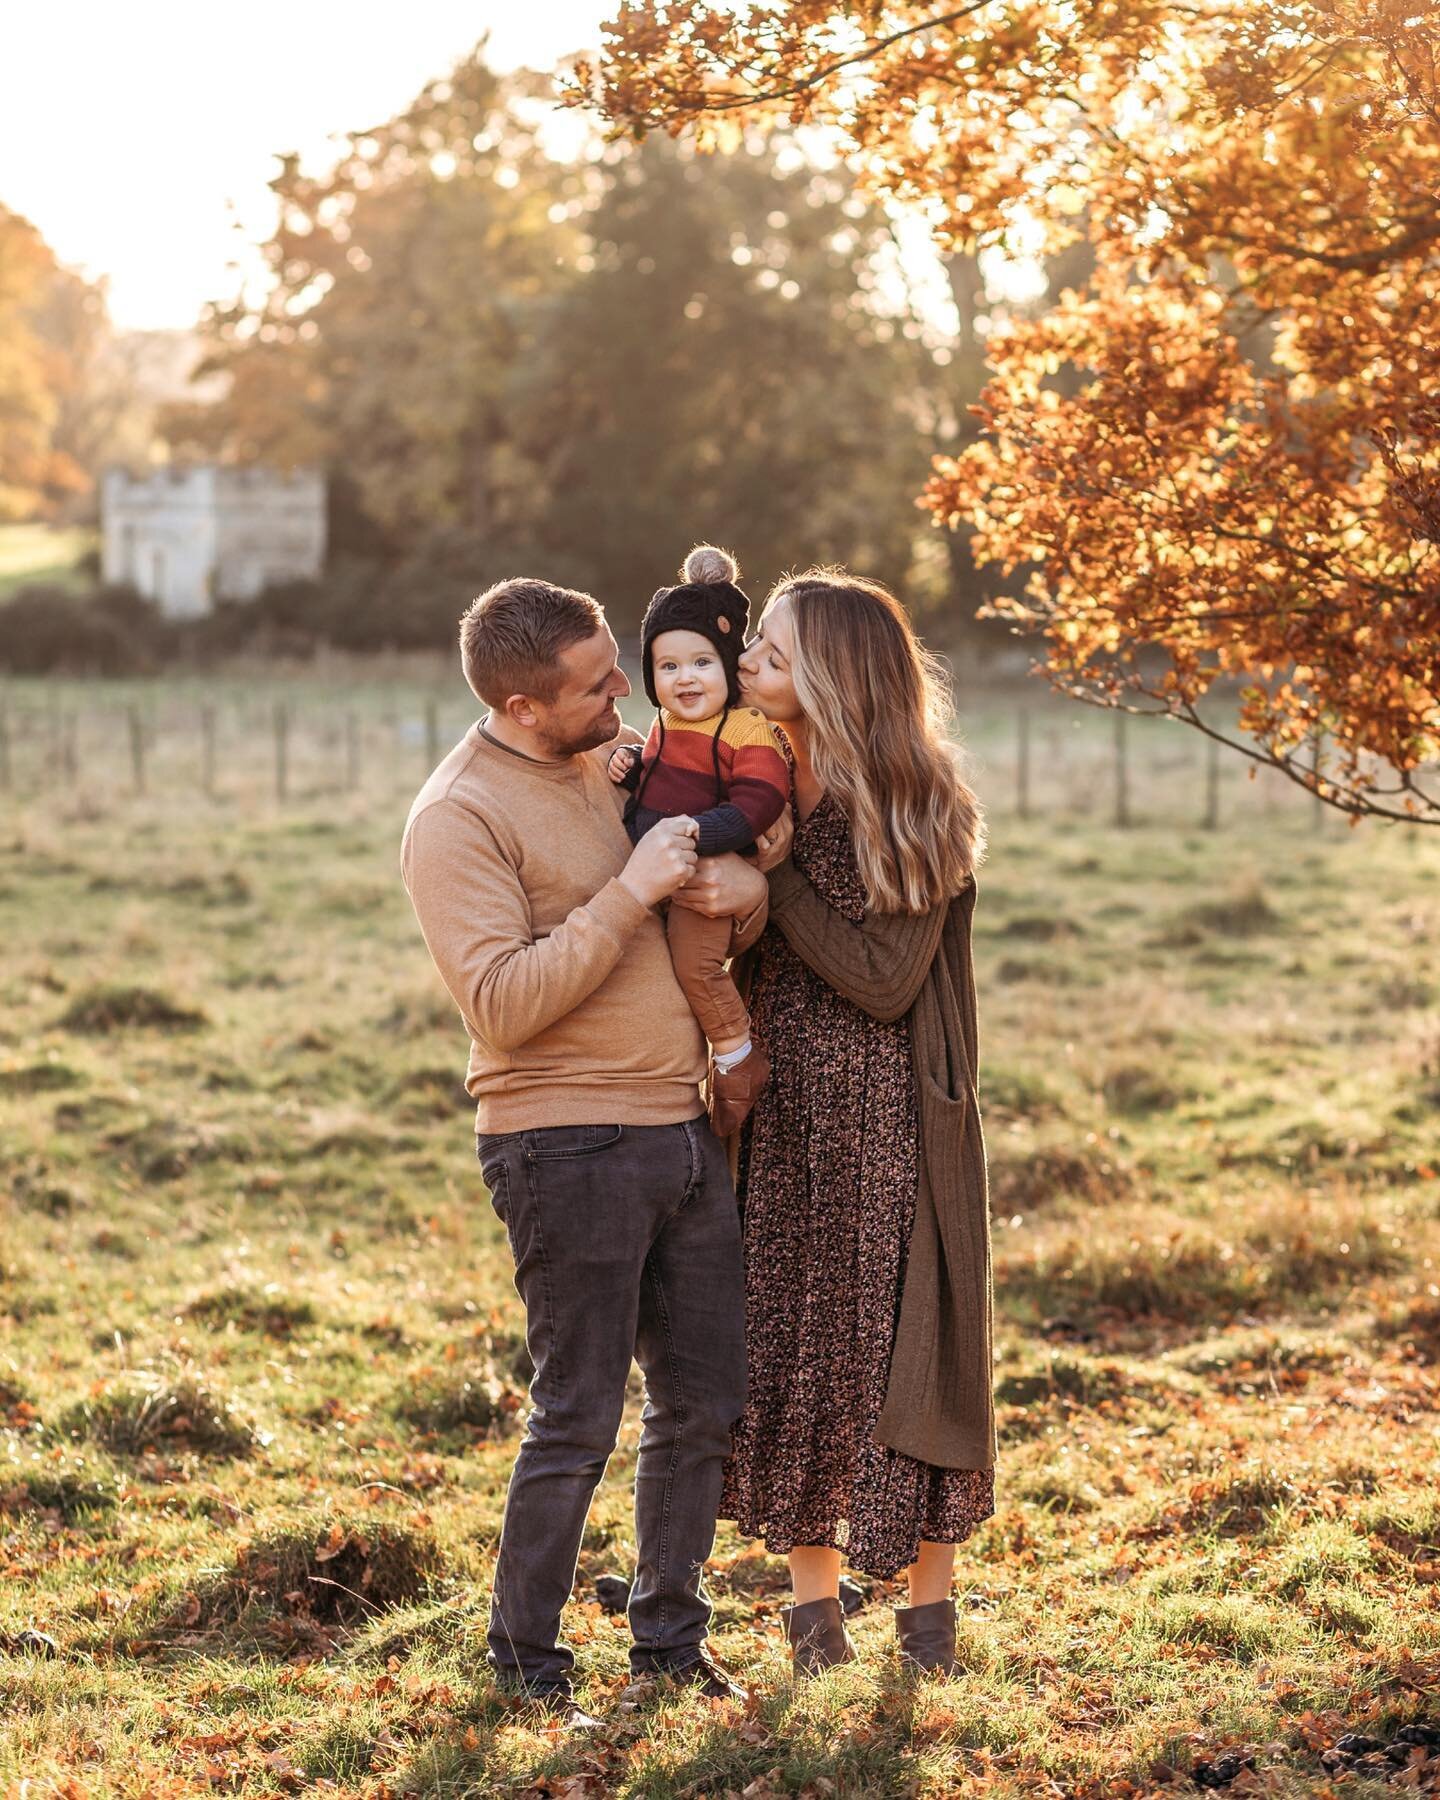 Want to take your own AUTUMN Family photos? 🍁

I ADORE this time of year! So figured (whilst I&rsquo;m amidst cluster feeds) I can give some tips on how to get the BEST photos at this time of year. 

1. LOCATION: Autumnal trees are a given! But the 